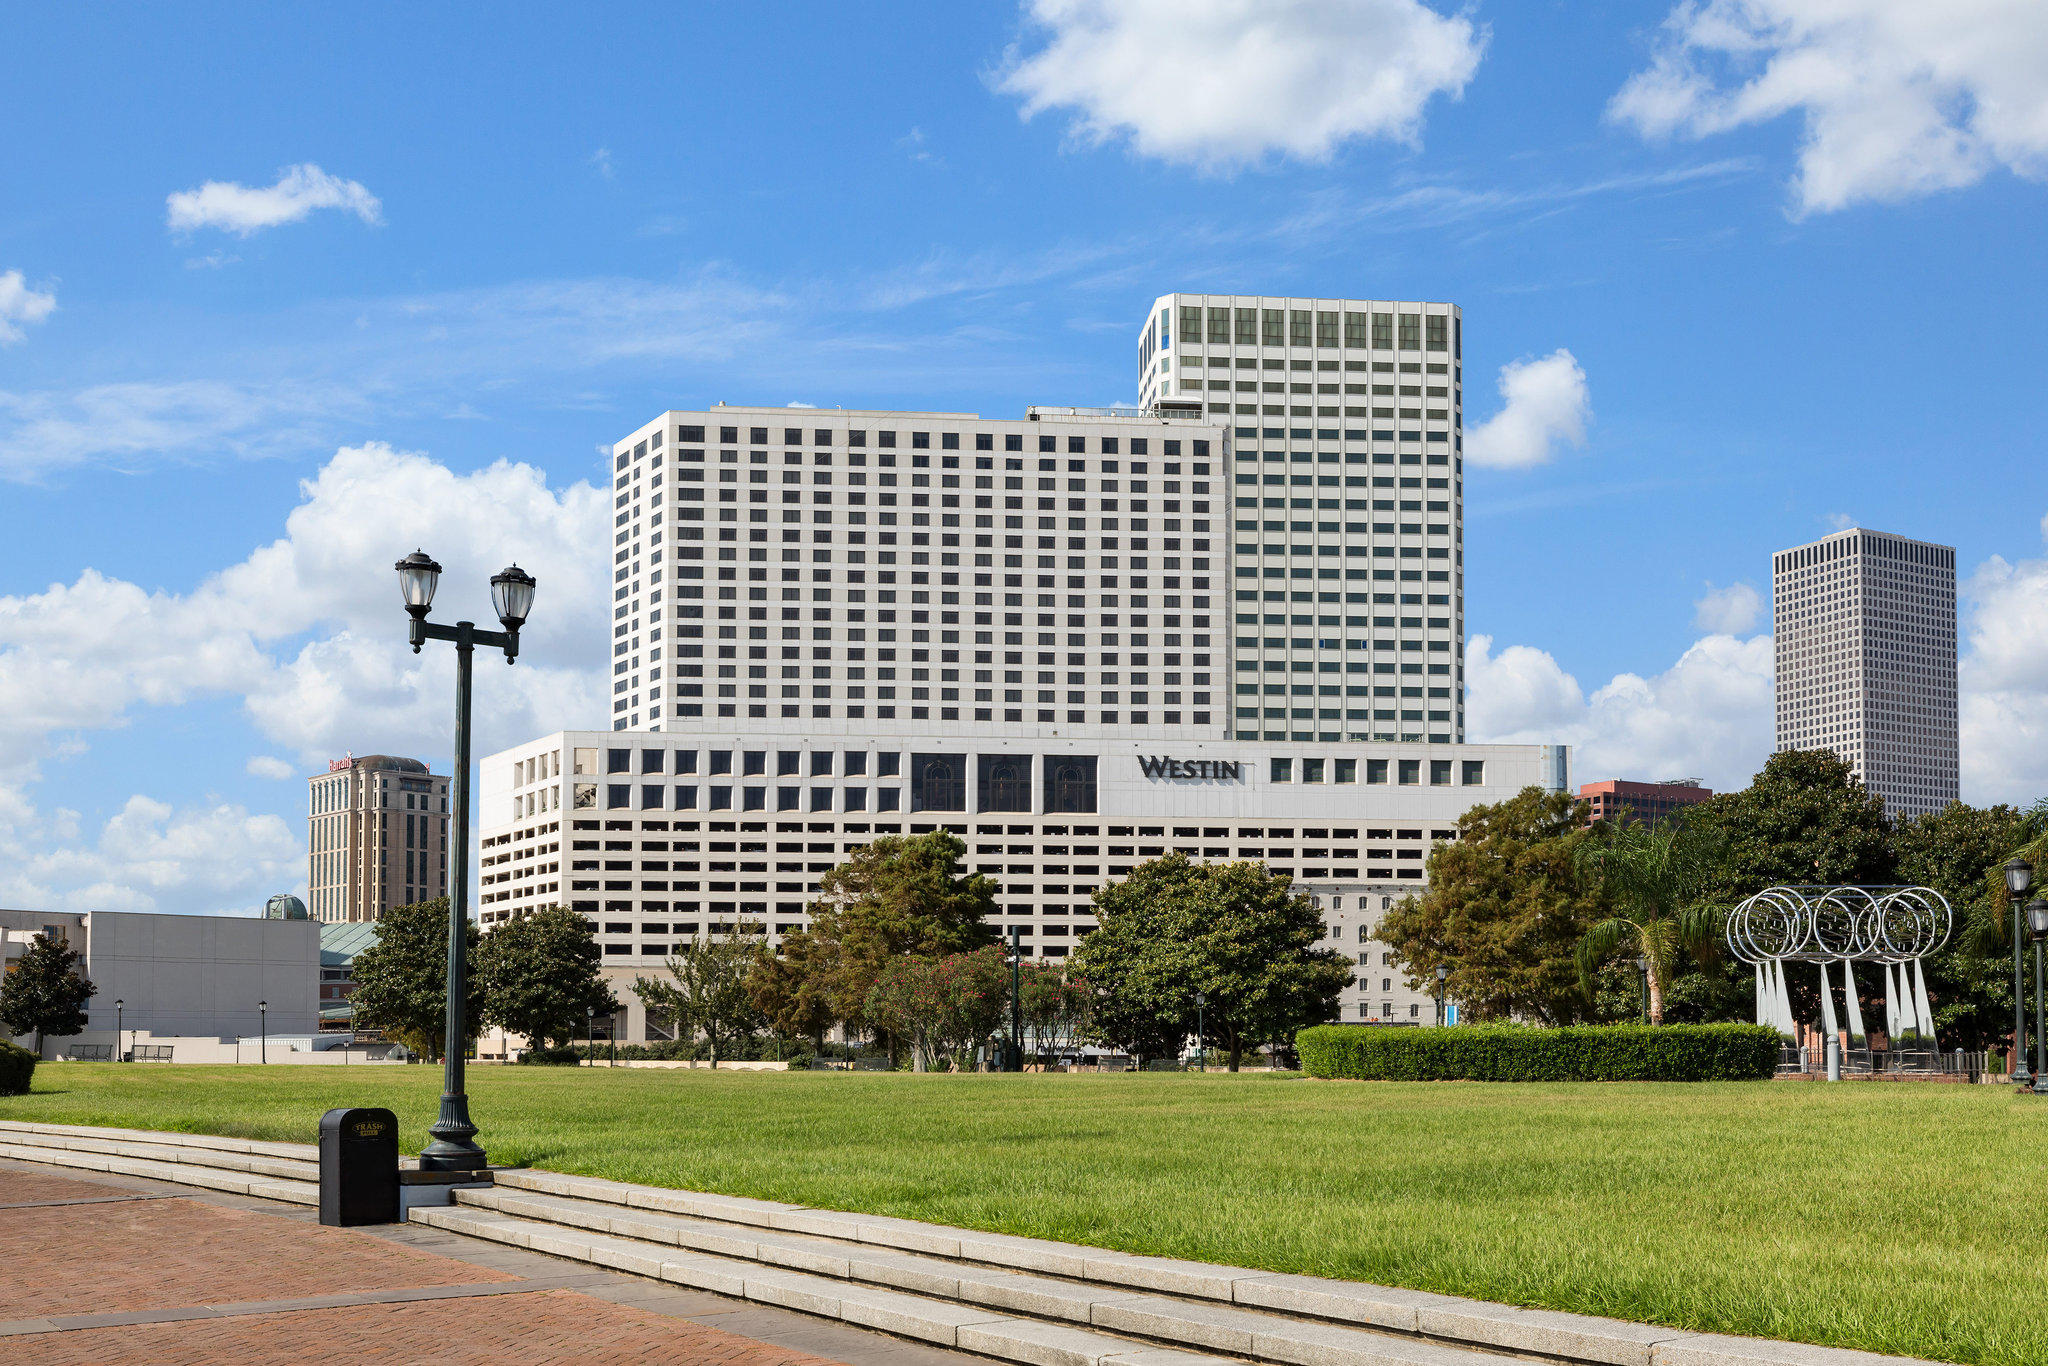 The Westin New Orleans Photo